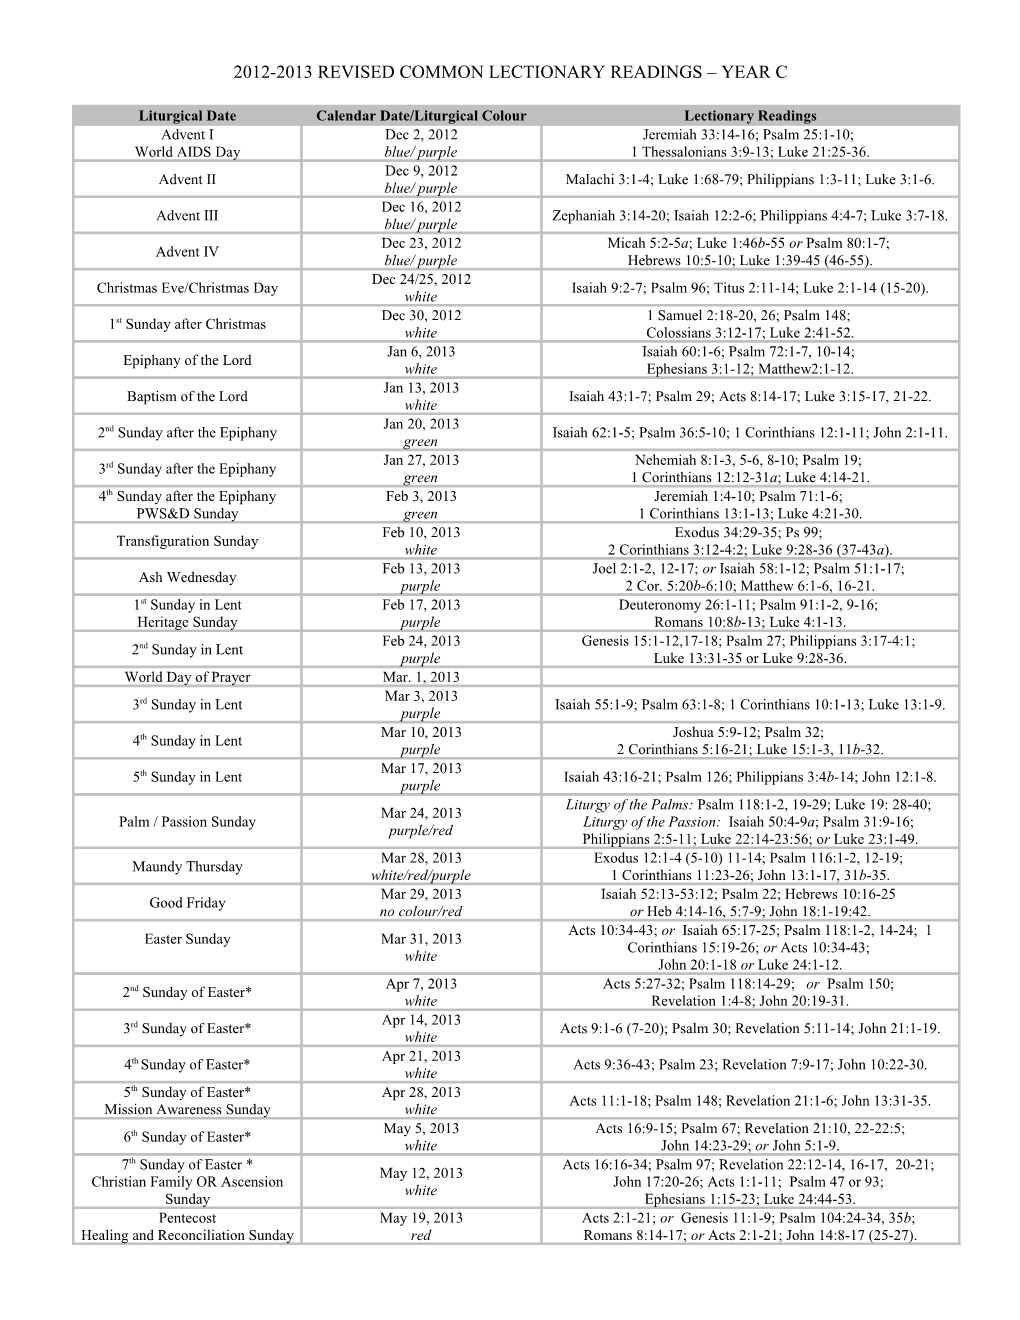 2012-2013 Revised Common Lectionary Readings Year C